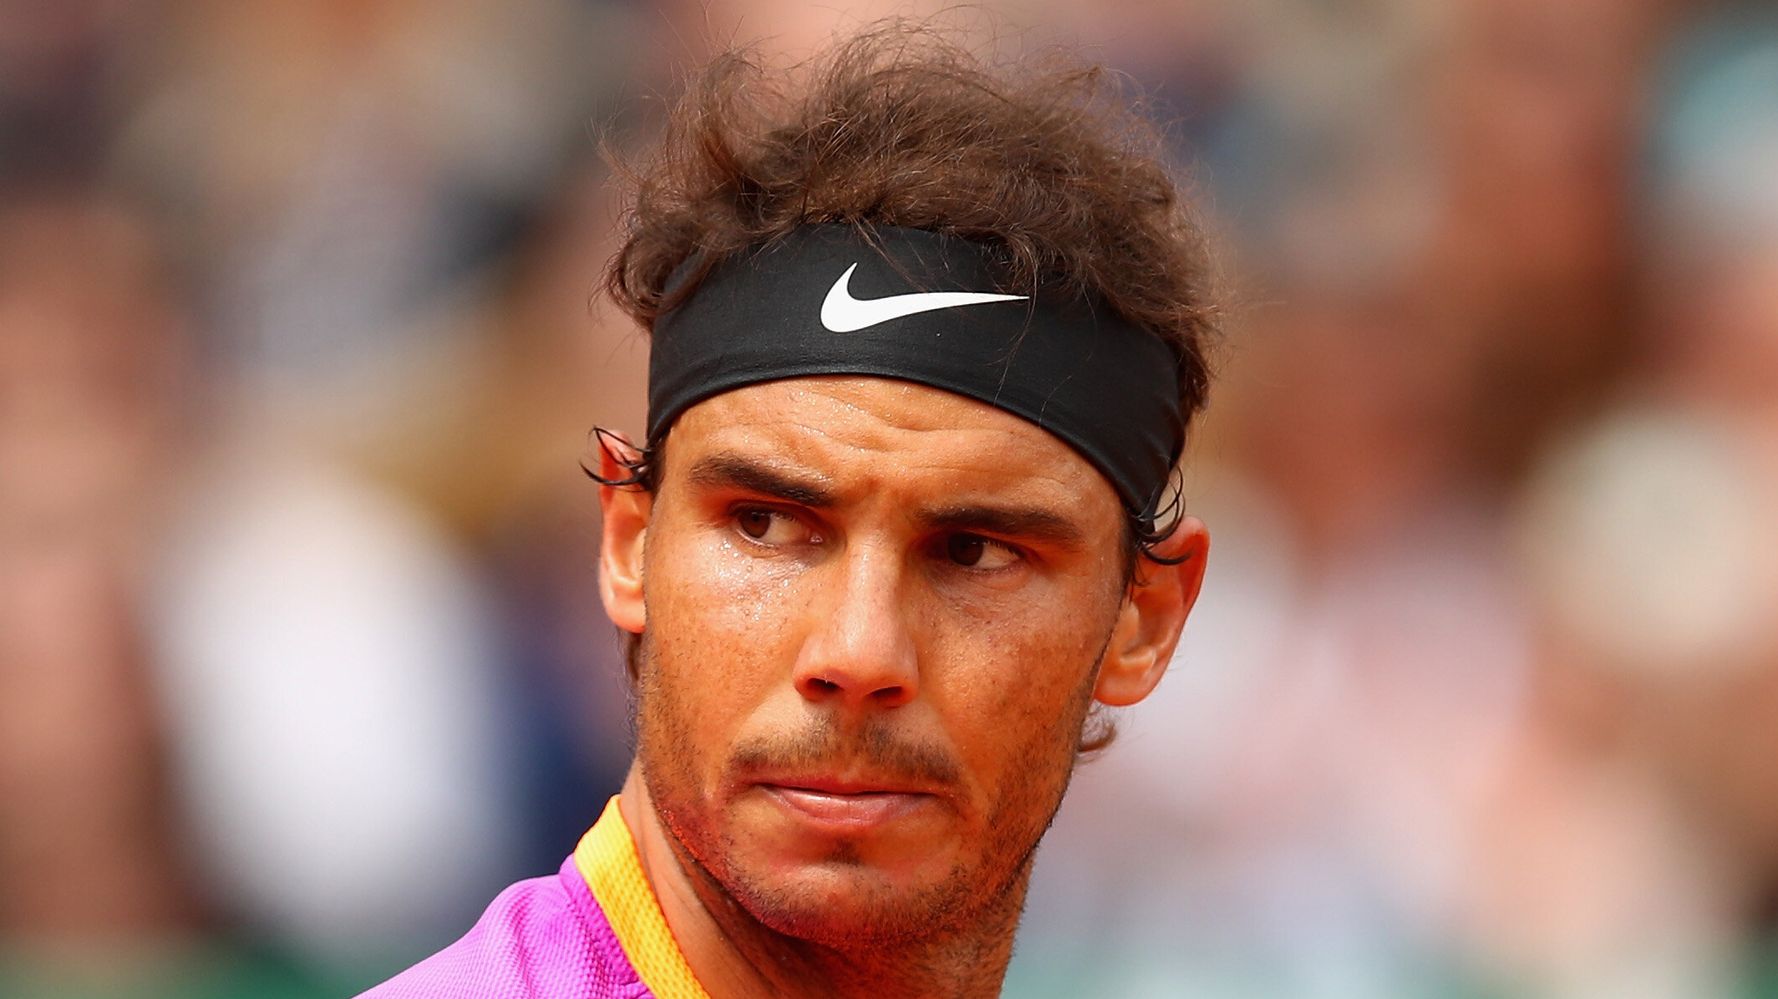 Rafael Nadal Out Of US Open, Ends Season To Heal Injured Foot | HuffPost  null